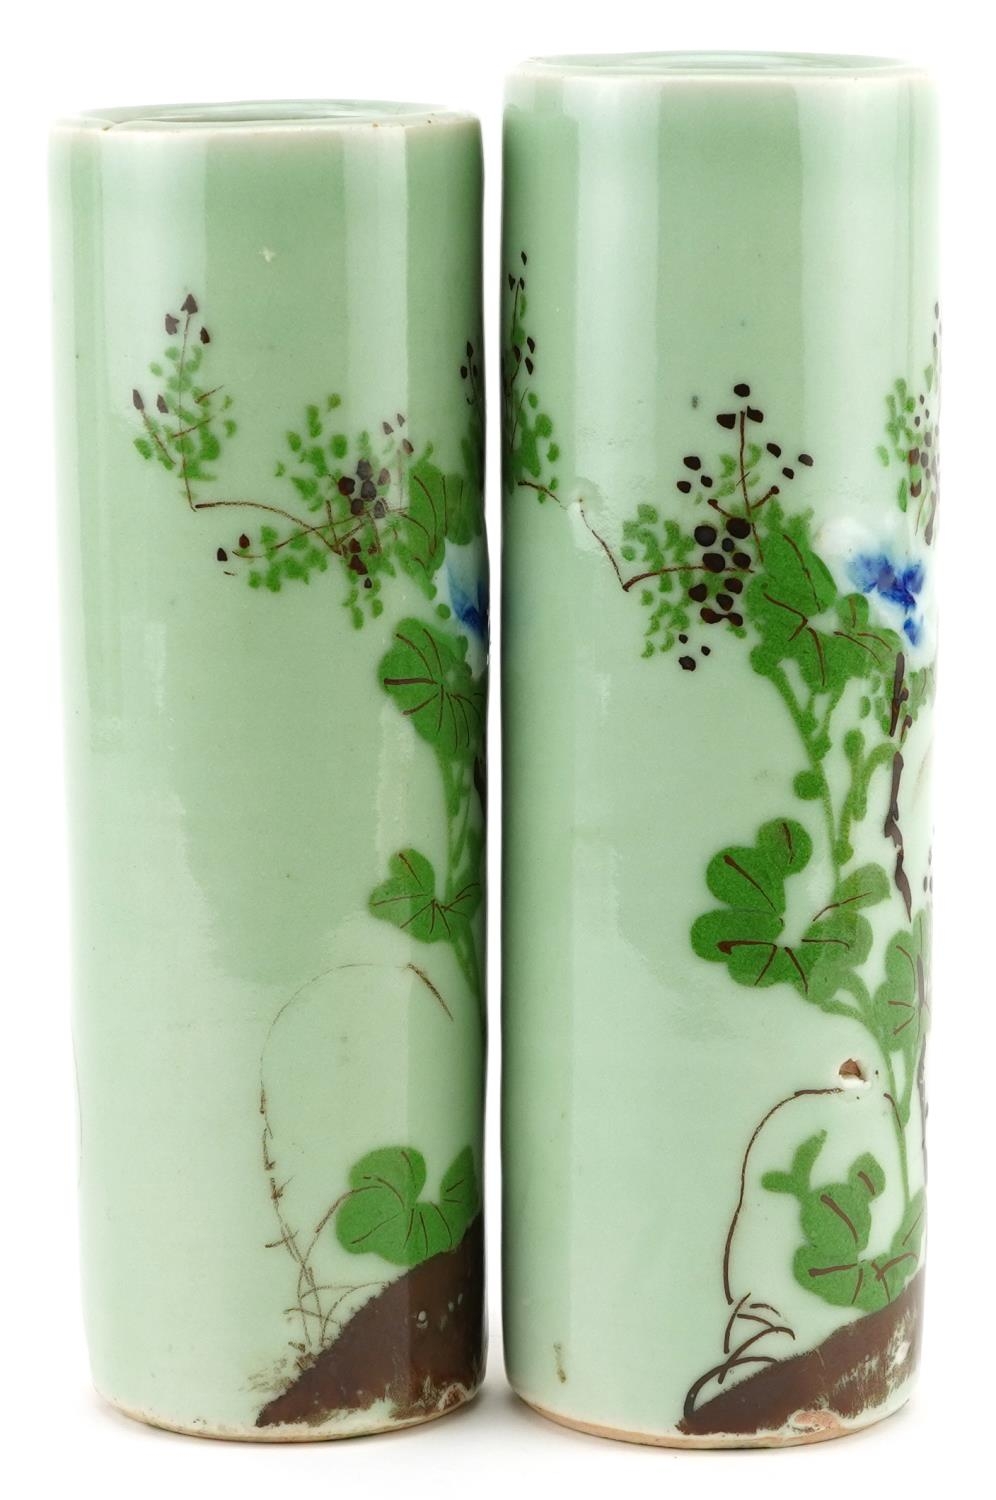 Matched pair of Japanese celadon glazed porcelain cylindrical vases hand painted with flowers, - Image 4 of 6